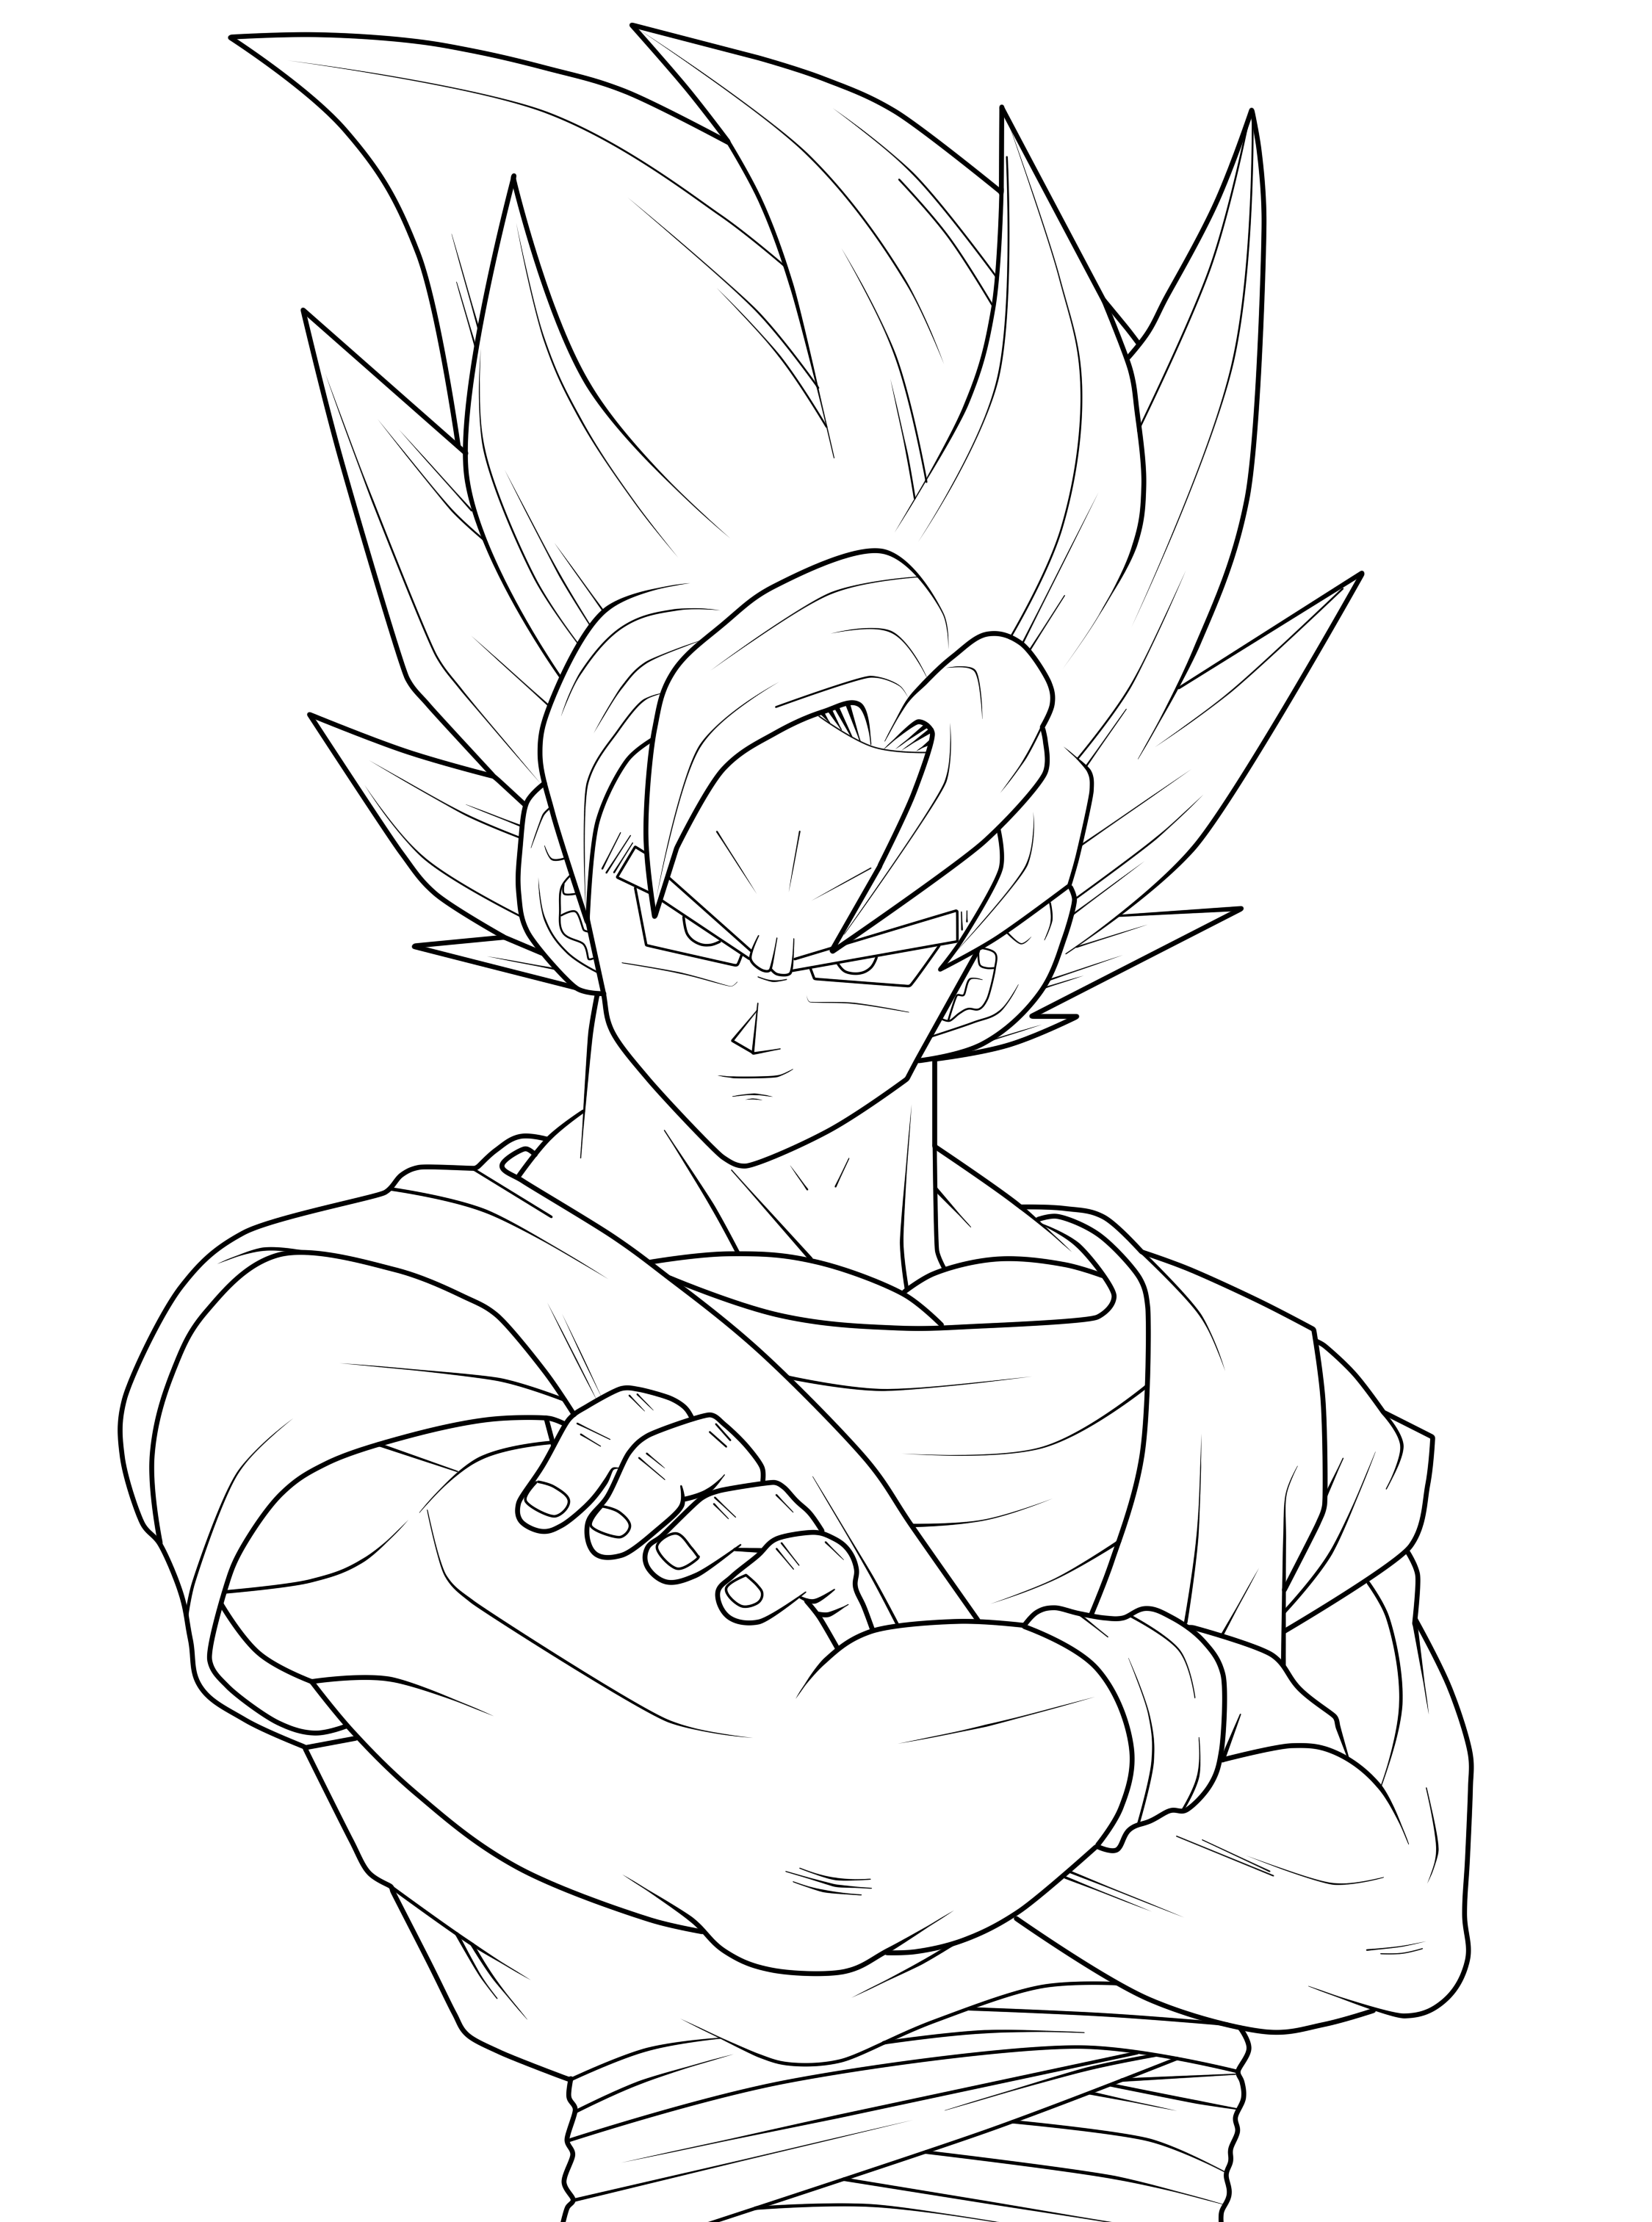 Coloring Pictures Of Goku | Coloring Pages for Kids and for Adults